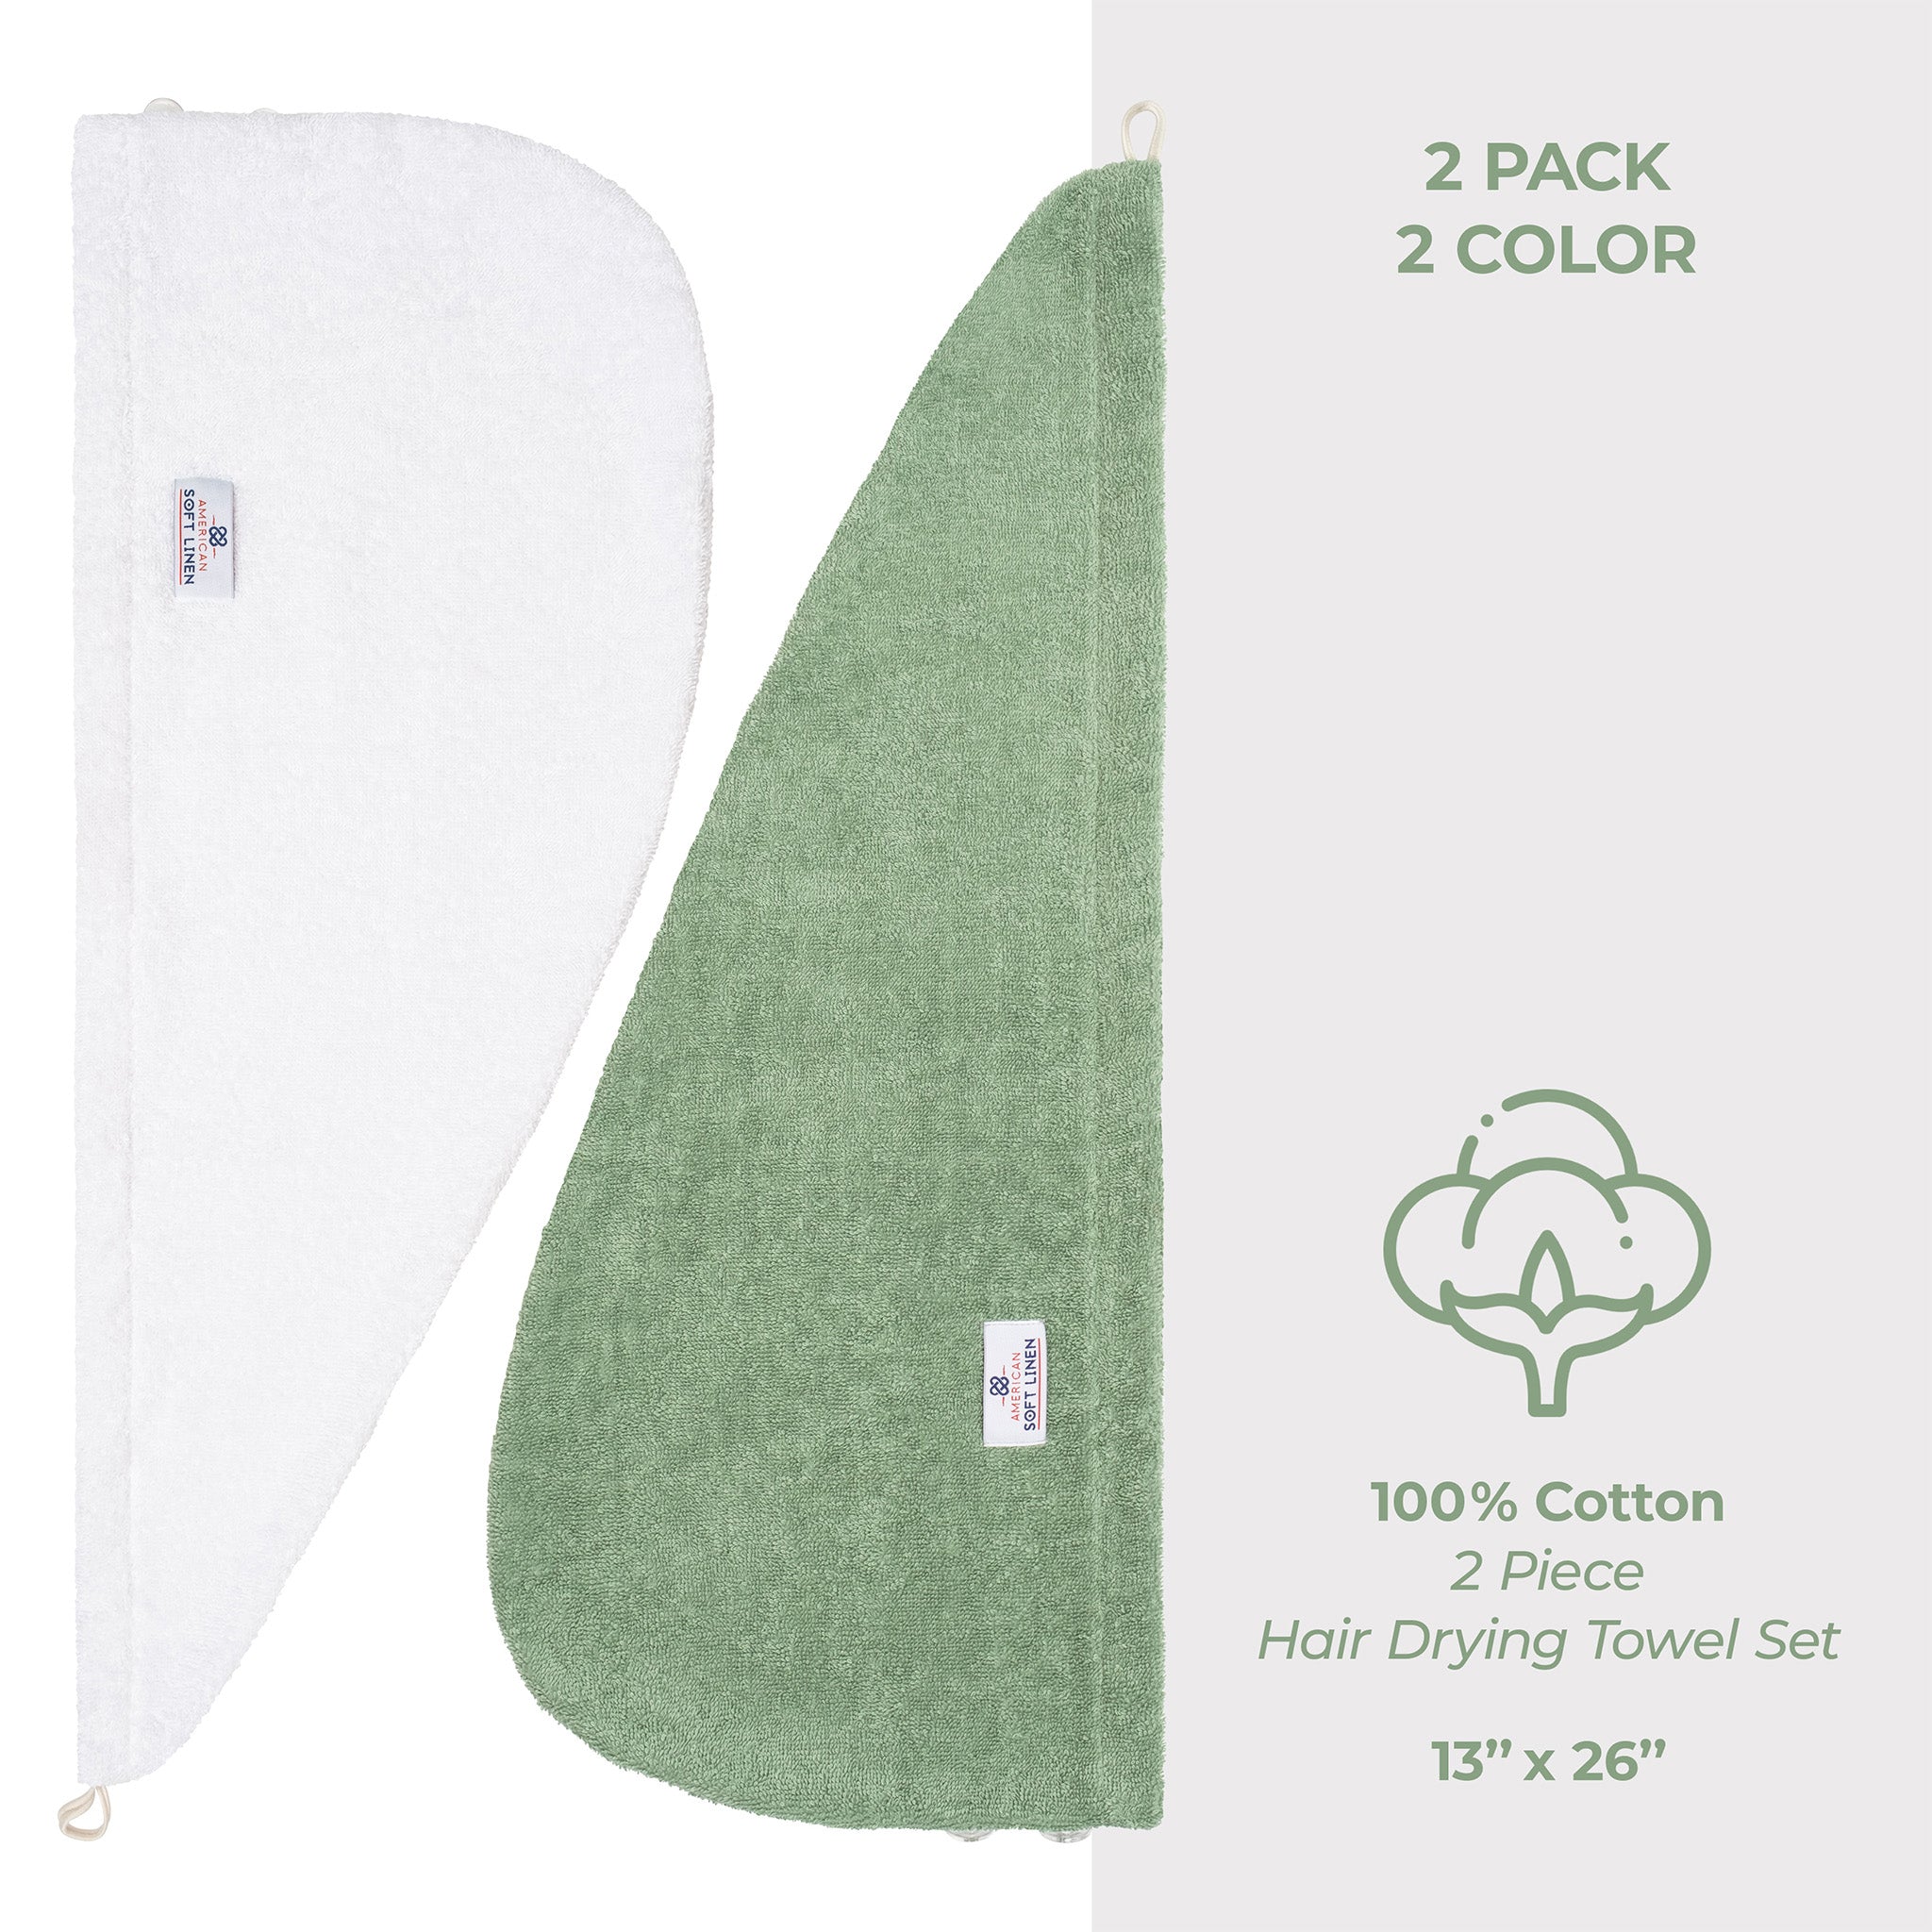 American Soft Linen 100% Cotton Hair Drying Towels for Women 2 pack 75 set case pack white-sage green-5